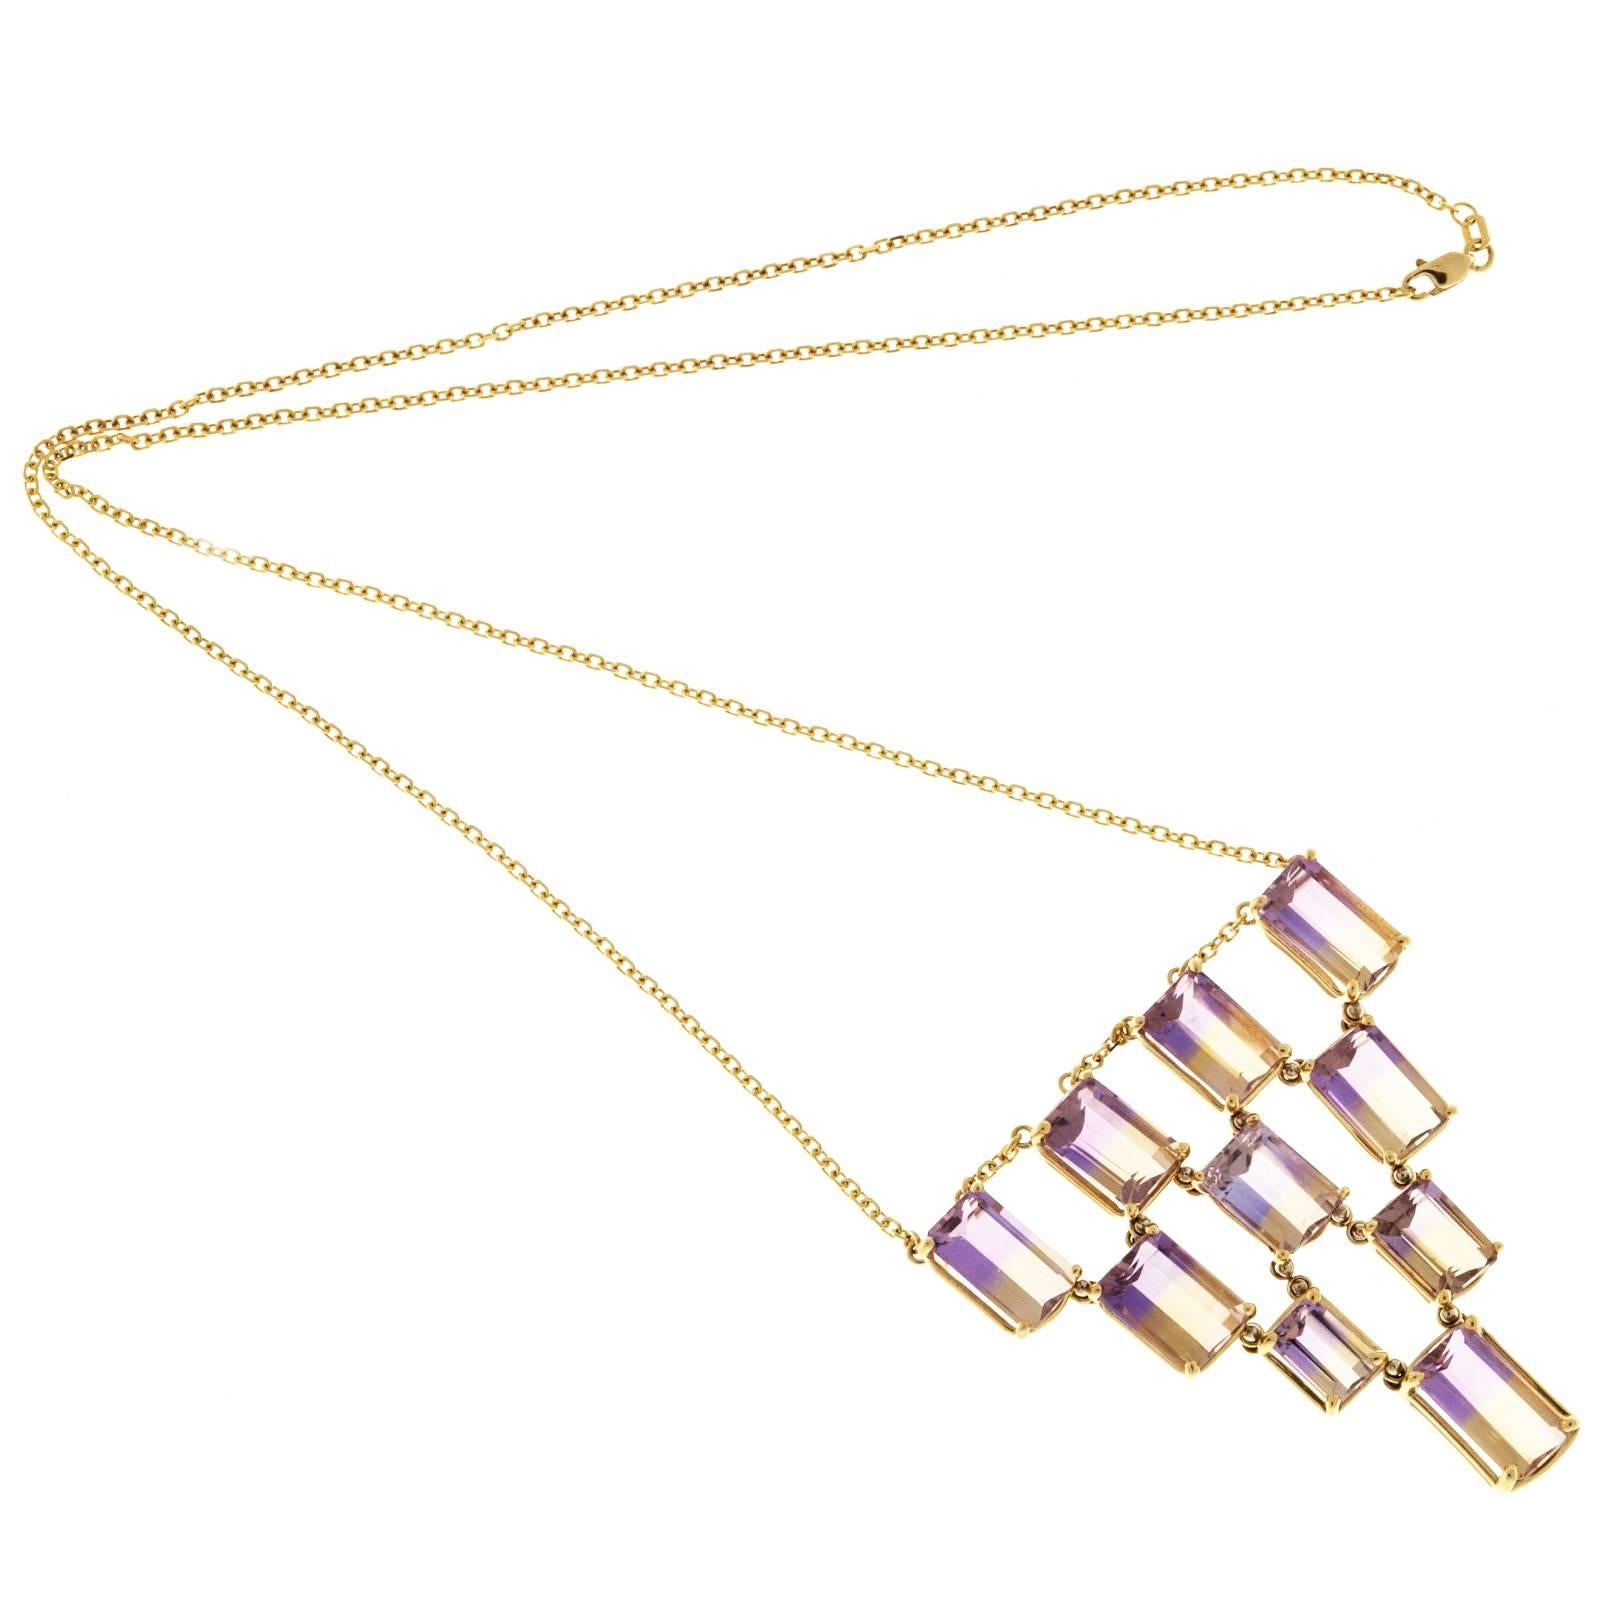 Peter Suchy Ametrine Yellow Gold Pendant Necklace Chain